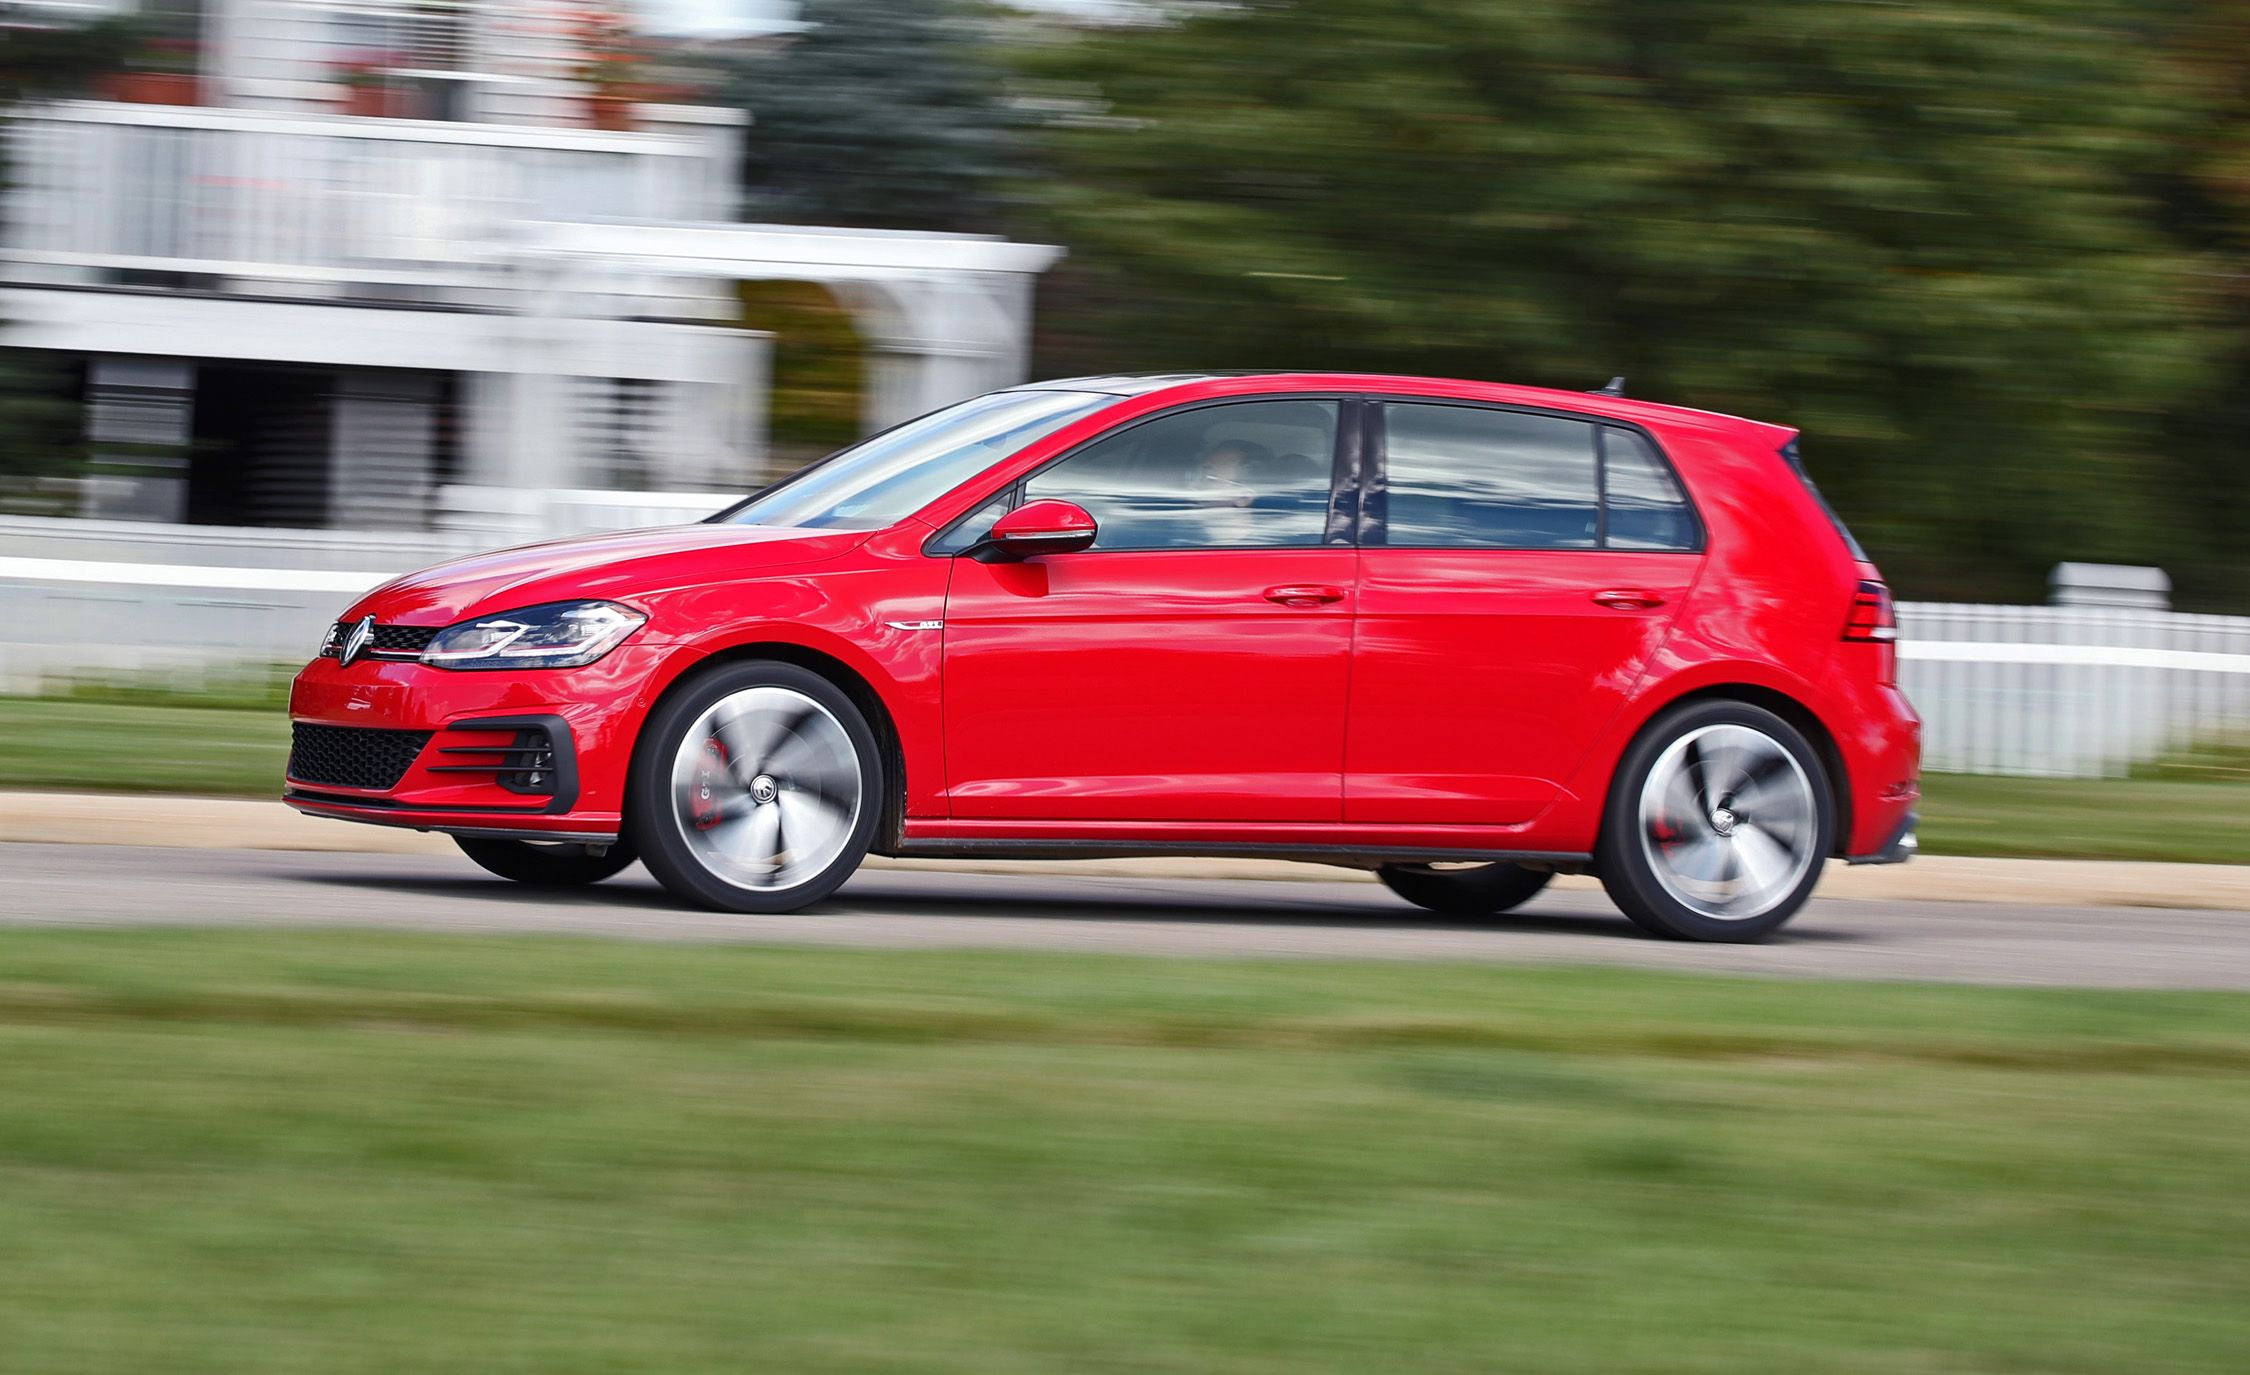 2020 Volkswagen Golf GTI Review, Pricing, and Specs